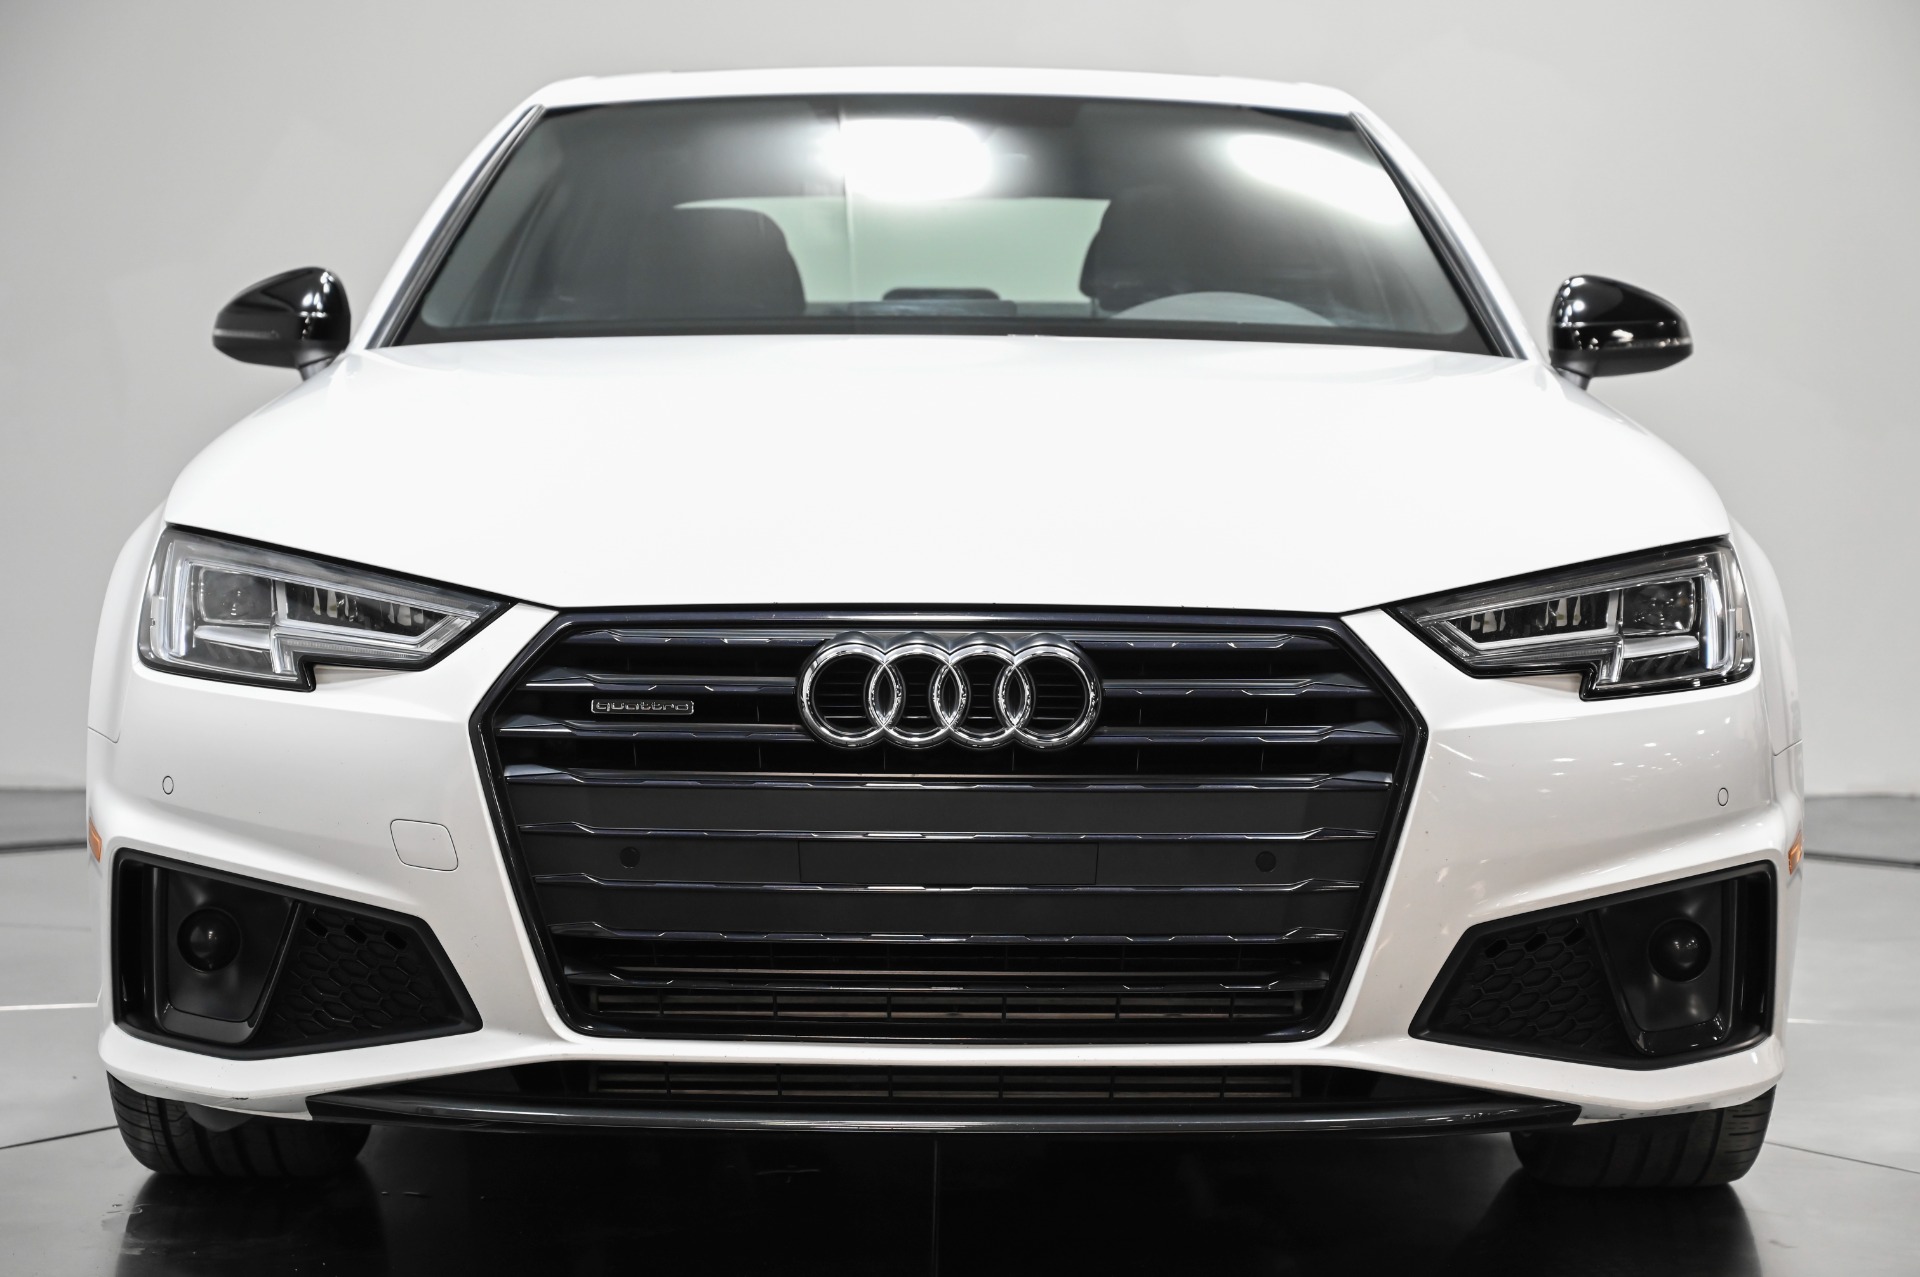 Used 2019 Audi A4 2.0T Premium Plus For Sale (Sold) Perfect Auto  Collection Stock #KA019458